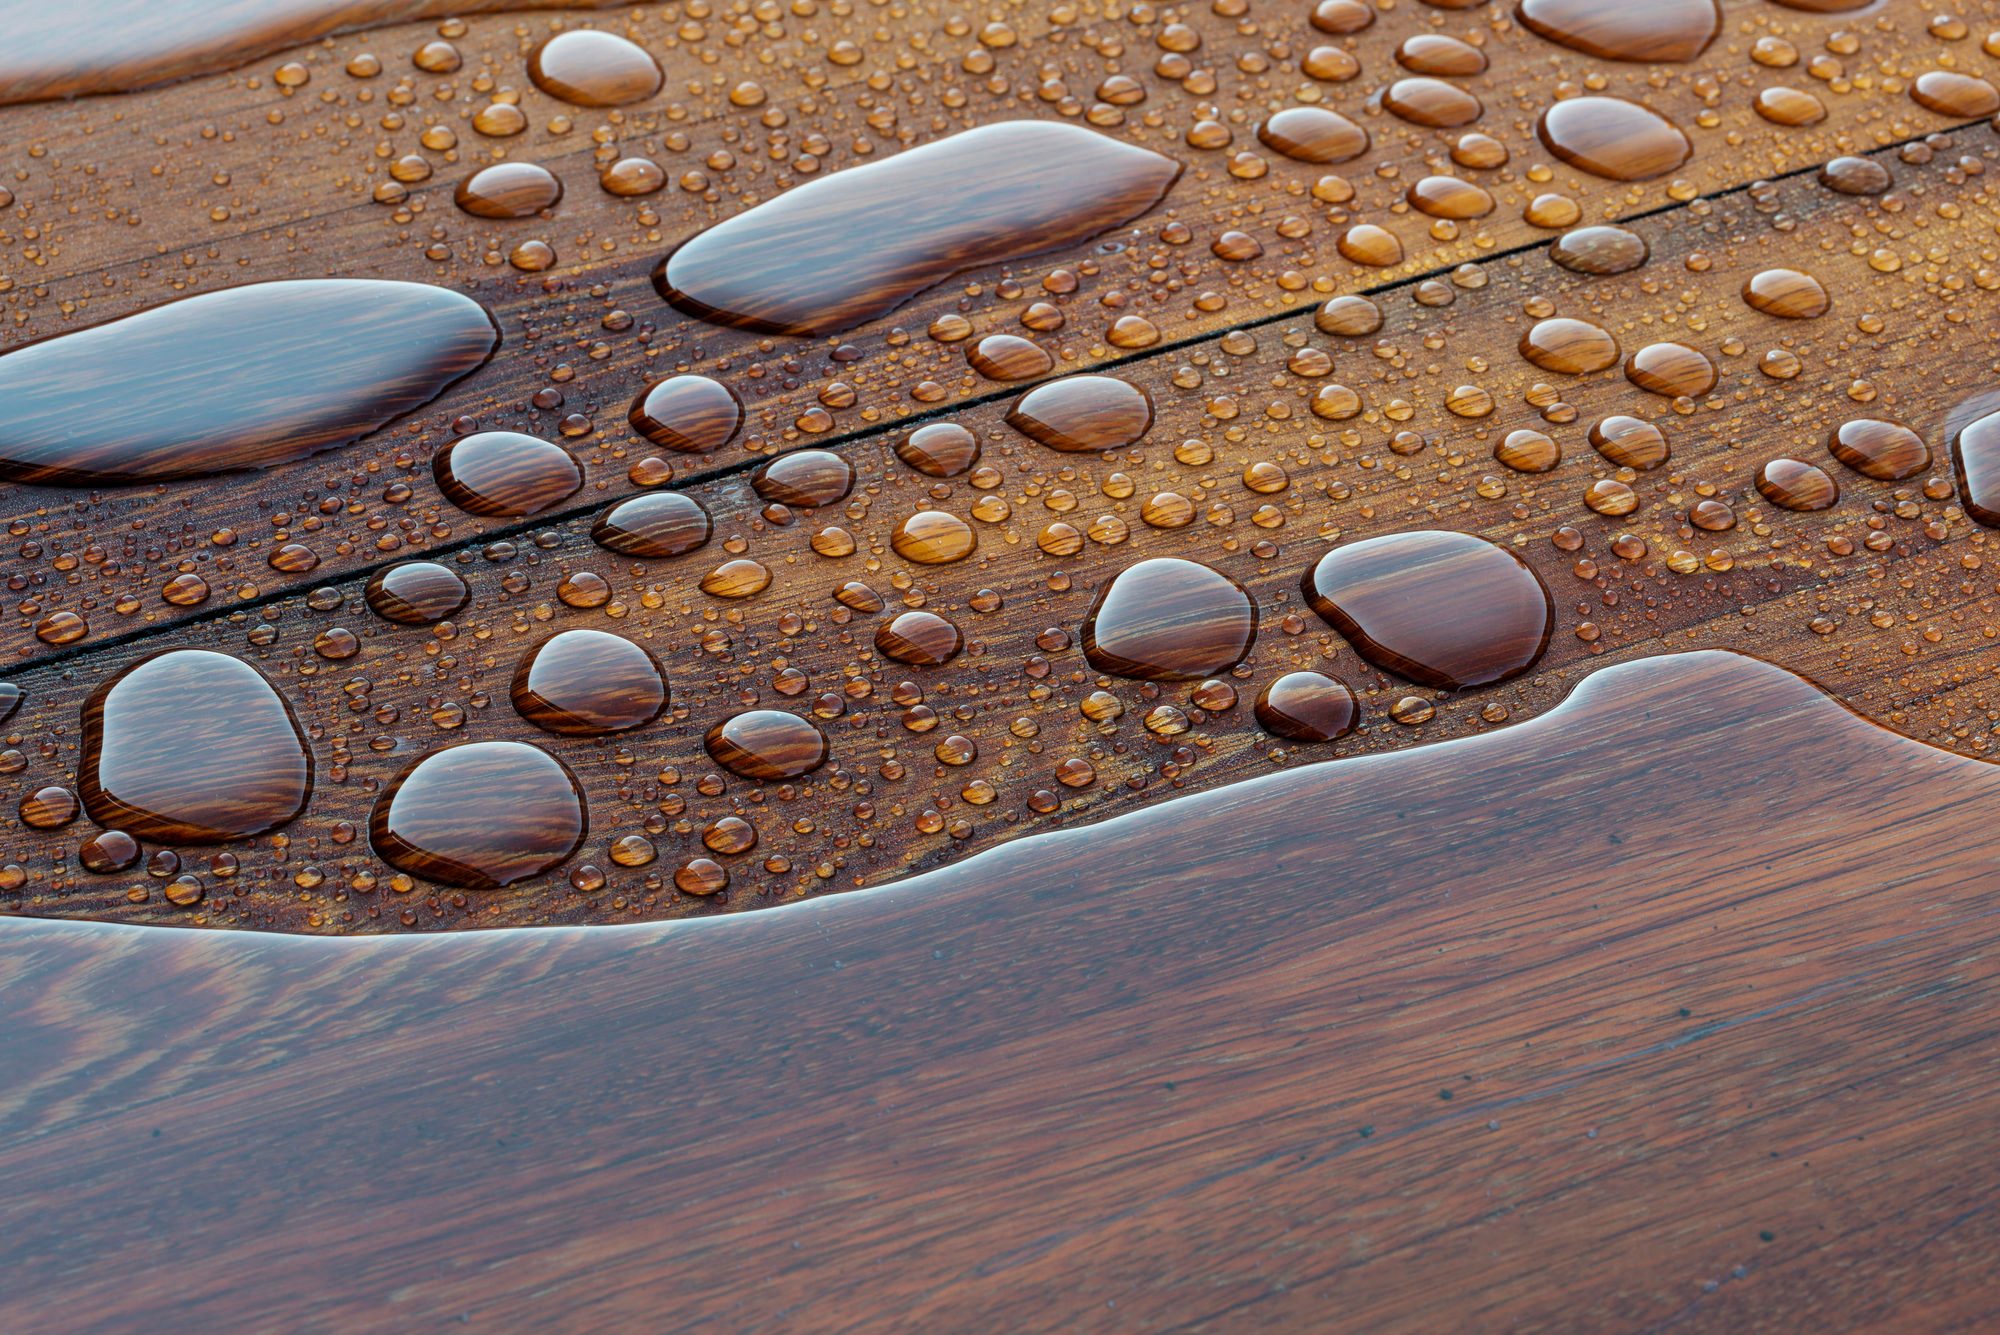 Wooden planks bathed in the rain